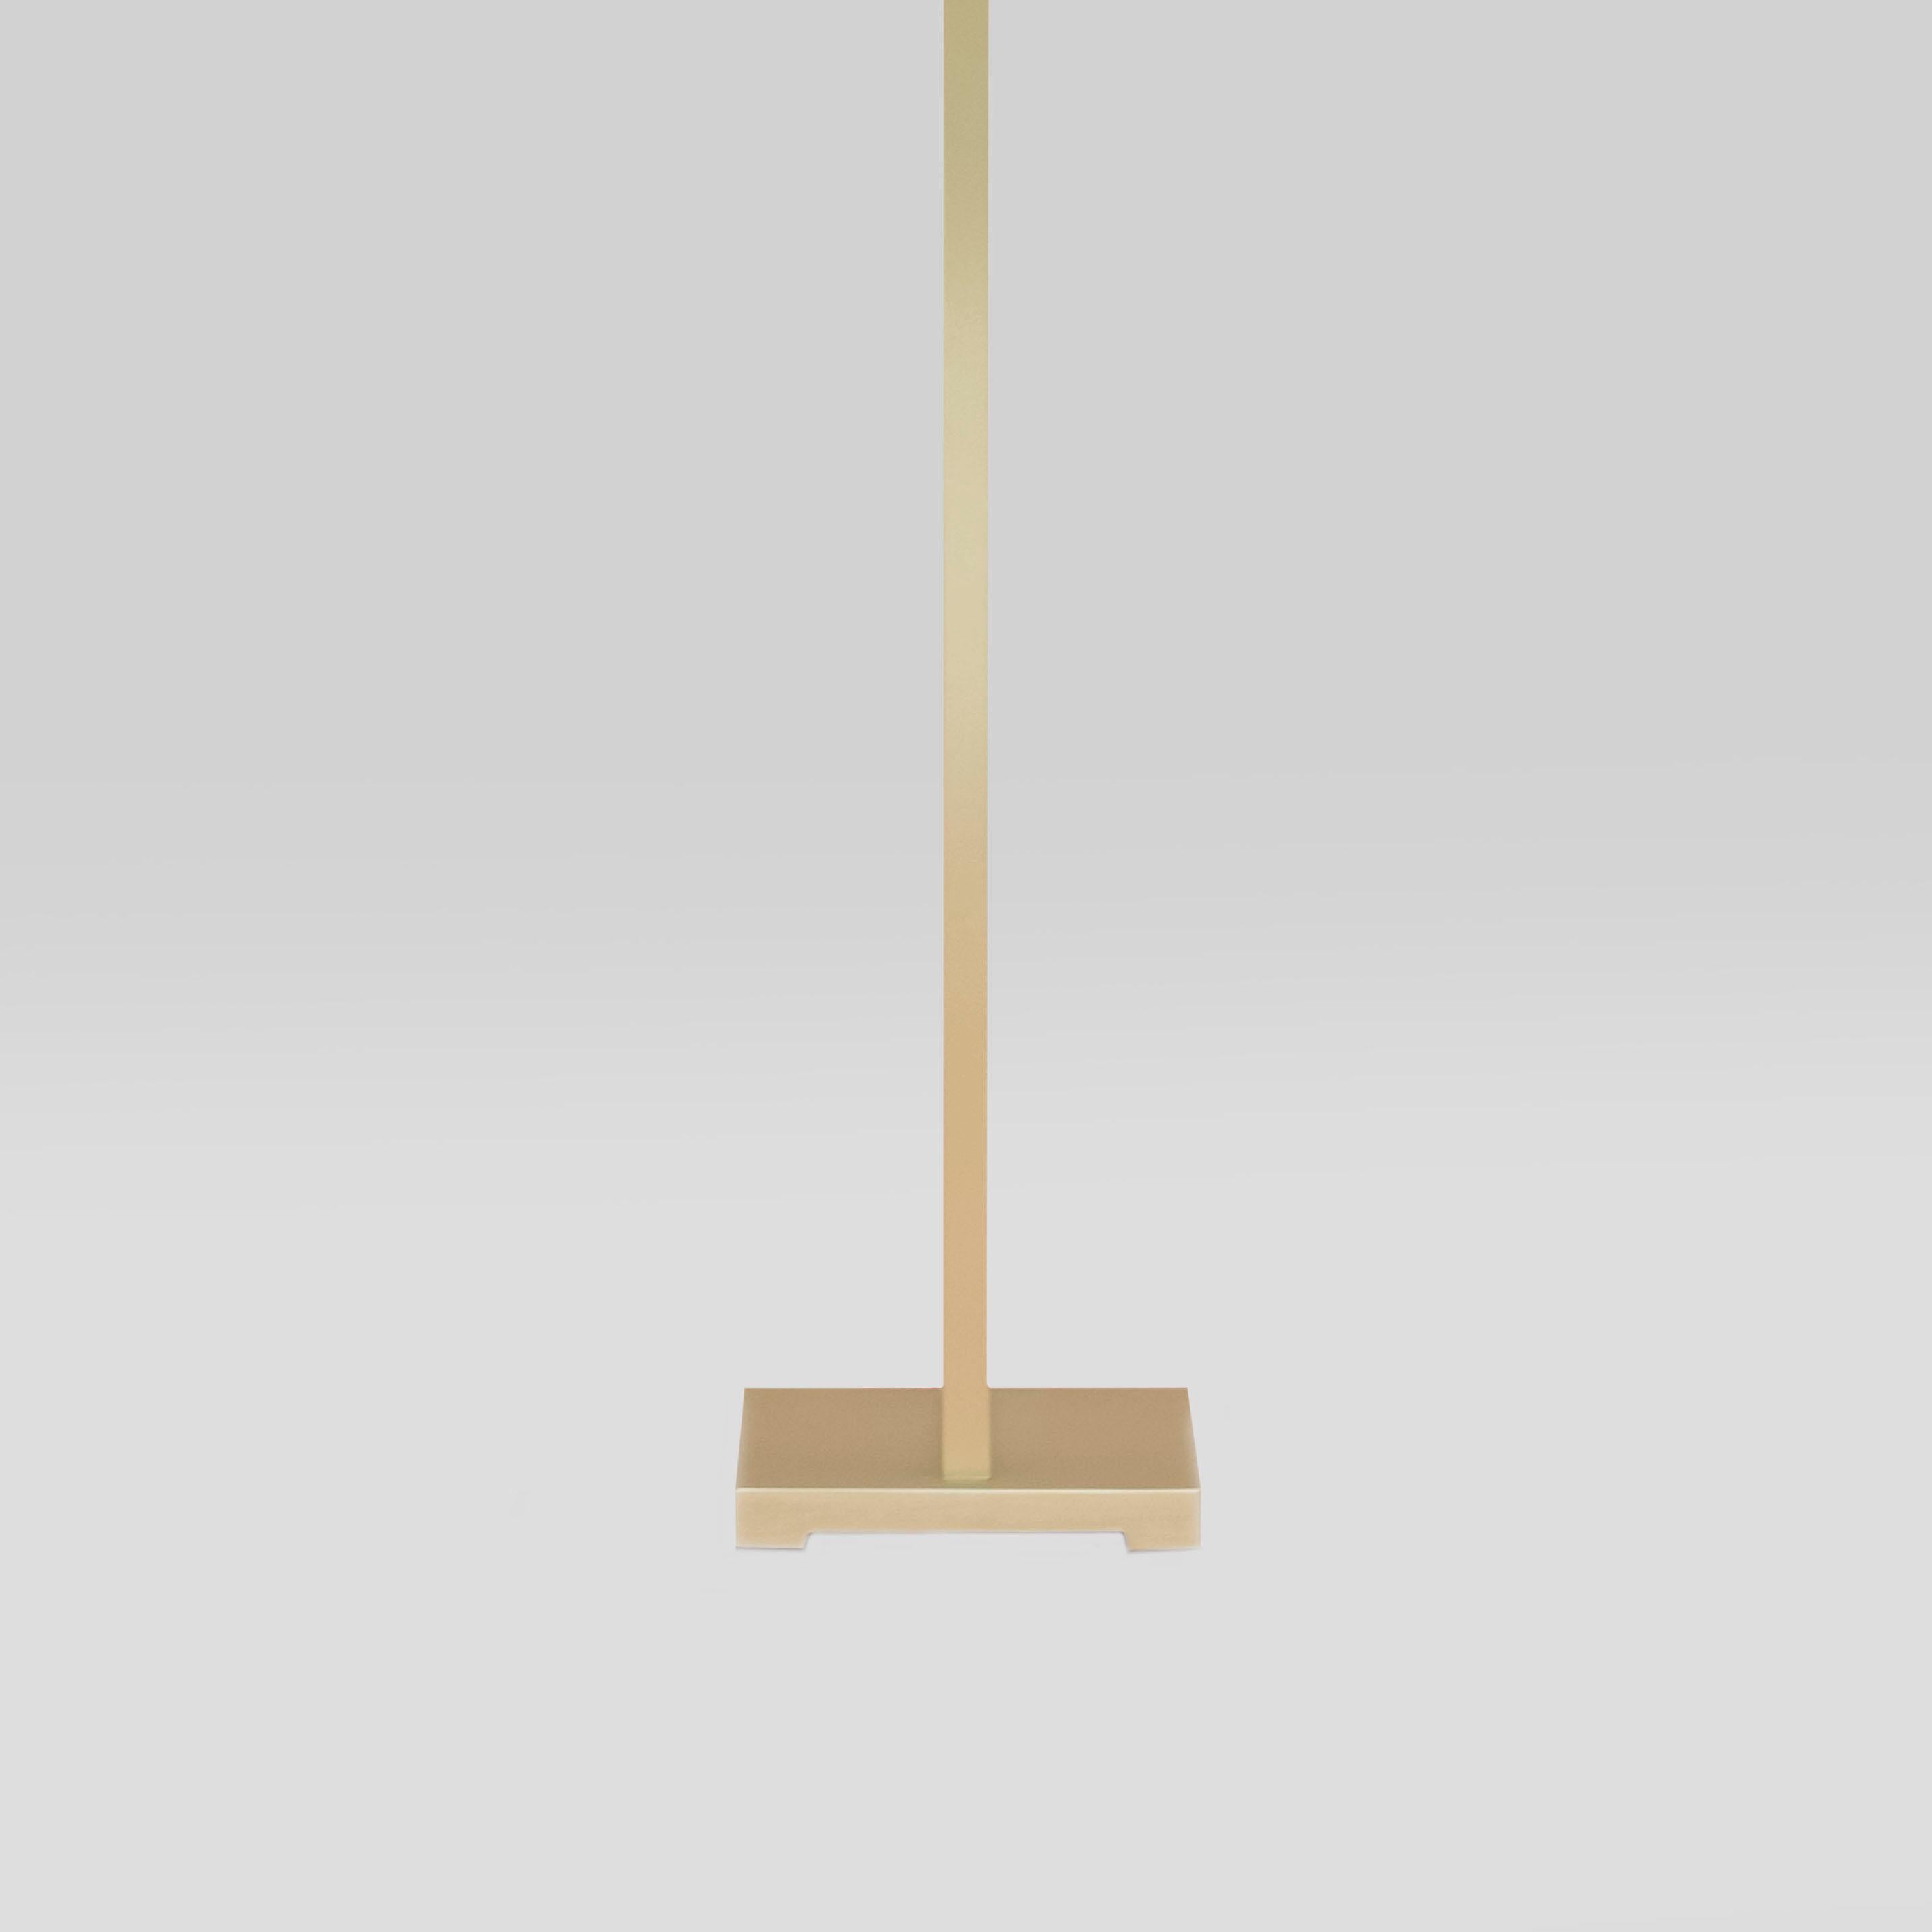 Floor lamp designed by Peter Ghyczy in 2010.
Manufactured by Ghyczy (Netherlands)

Using sandcasted metal, this lampshade features perfectly symmetrical beams at its base. Minimal in look, at first glance this lamp appears to be levitating, yet